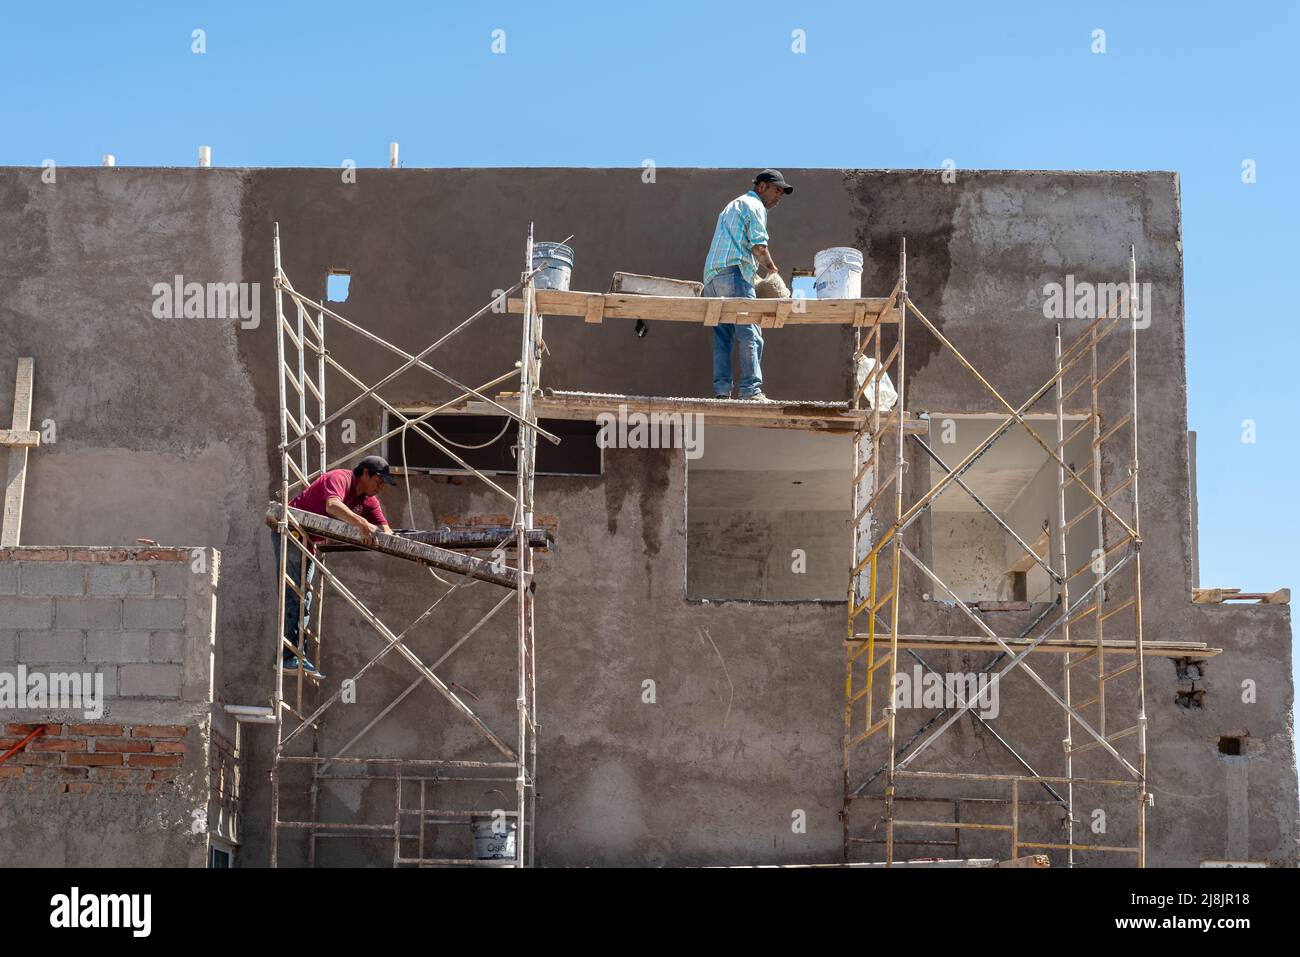 Construction workers on metal scaffolding with wooden planks apply stucco on new building, San Carlos, Sonora, Mexico, United States. Stock Photo